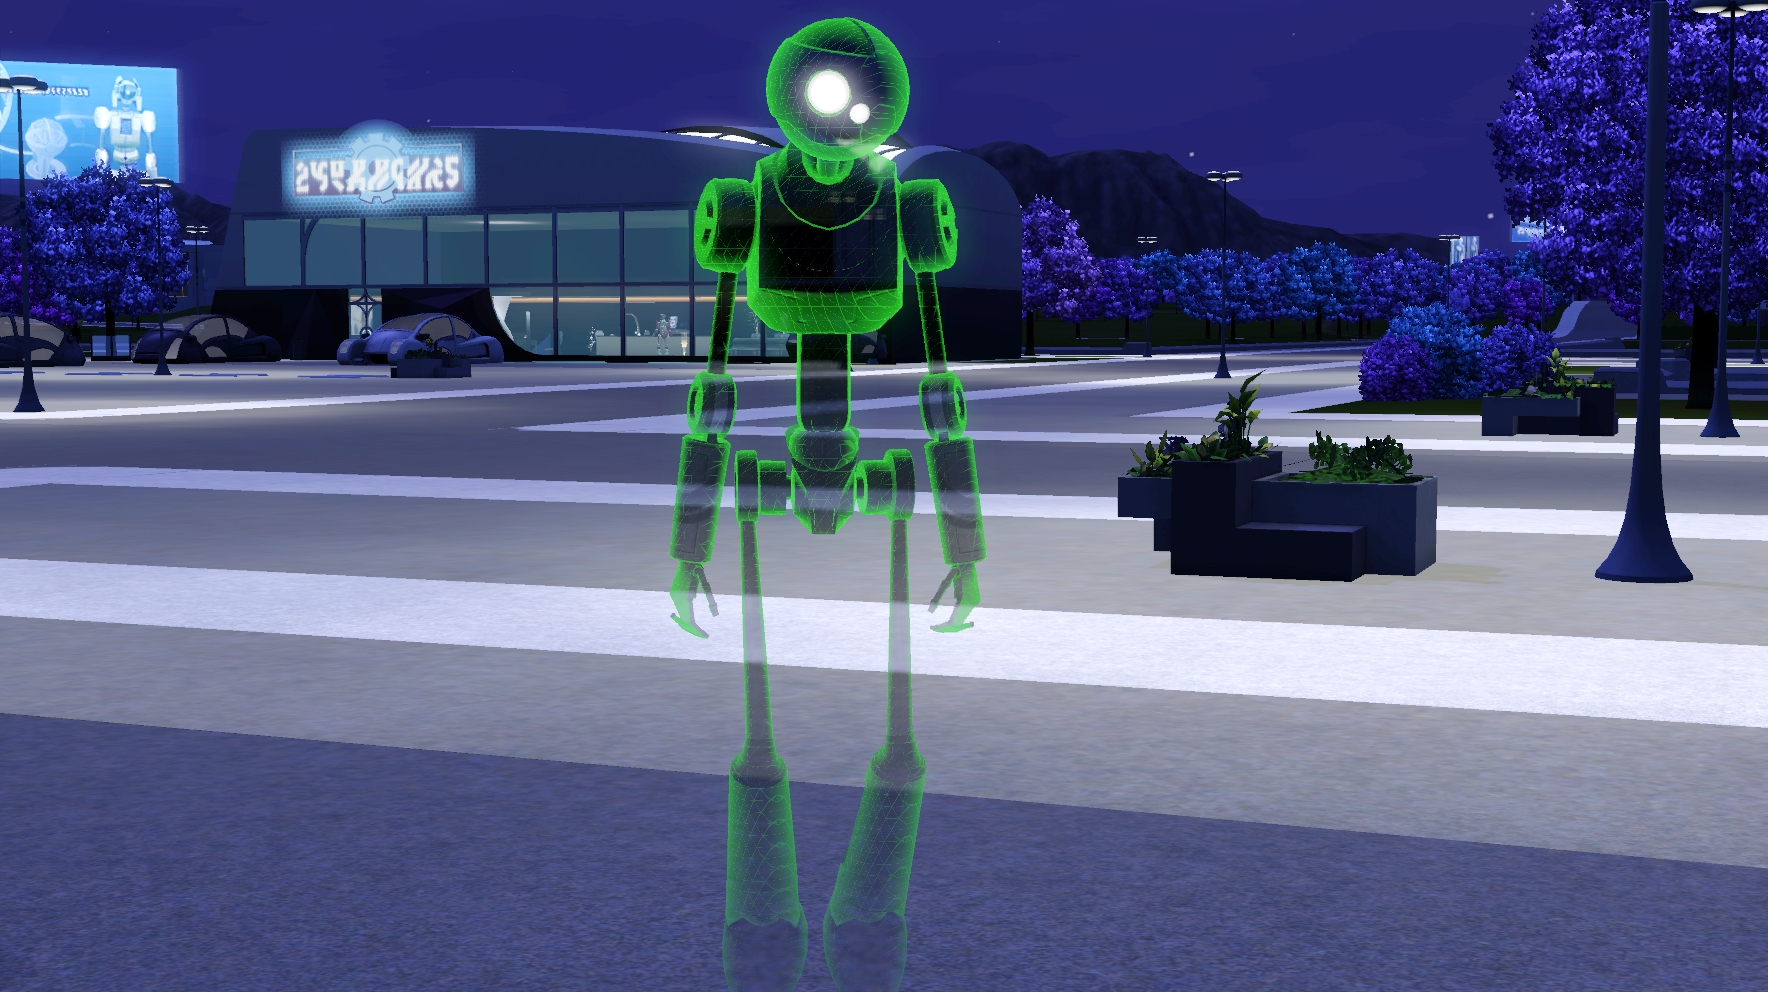 sims 3 into the future, can plumbots reproduce